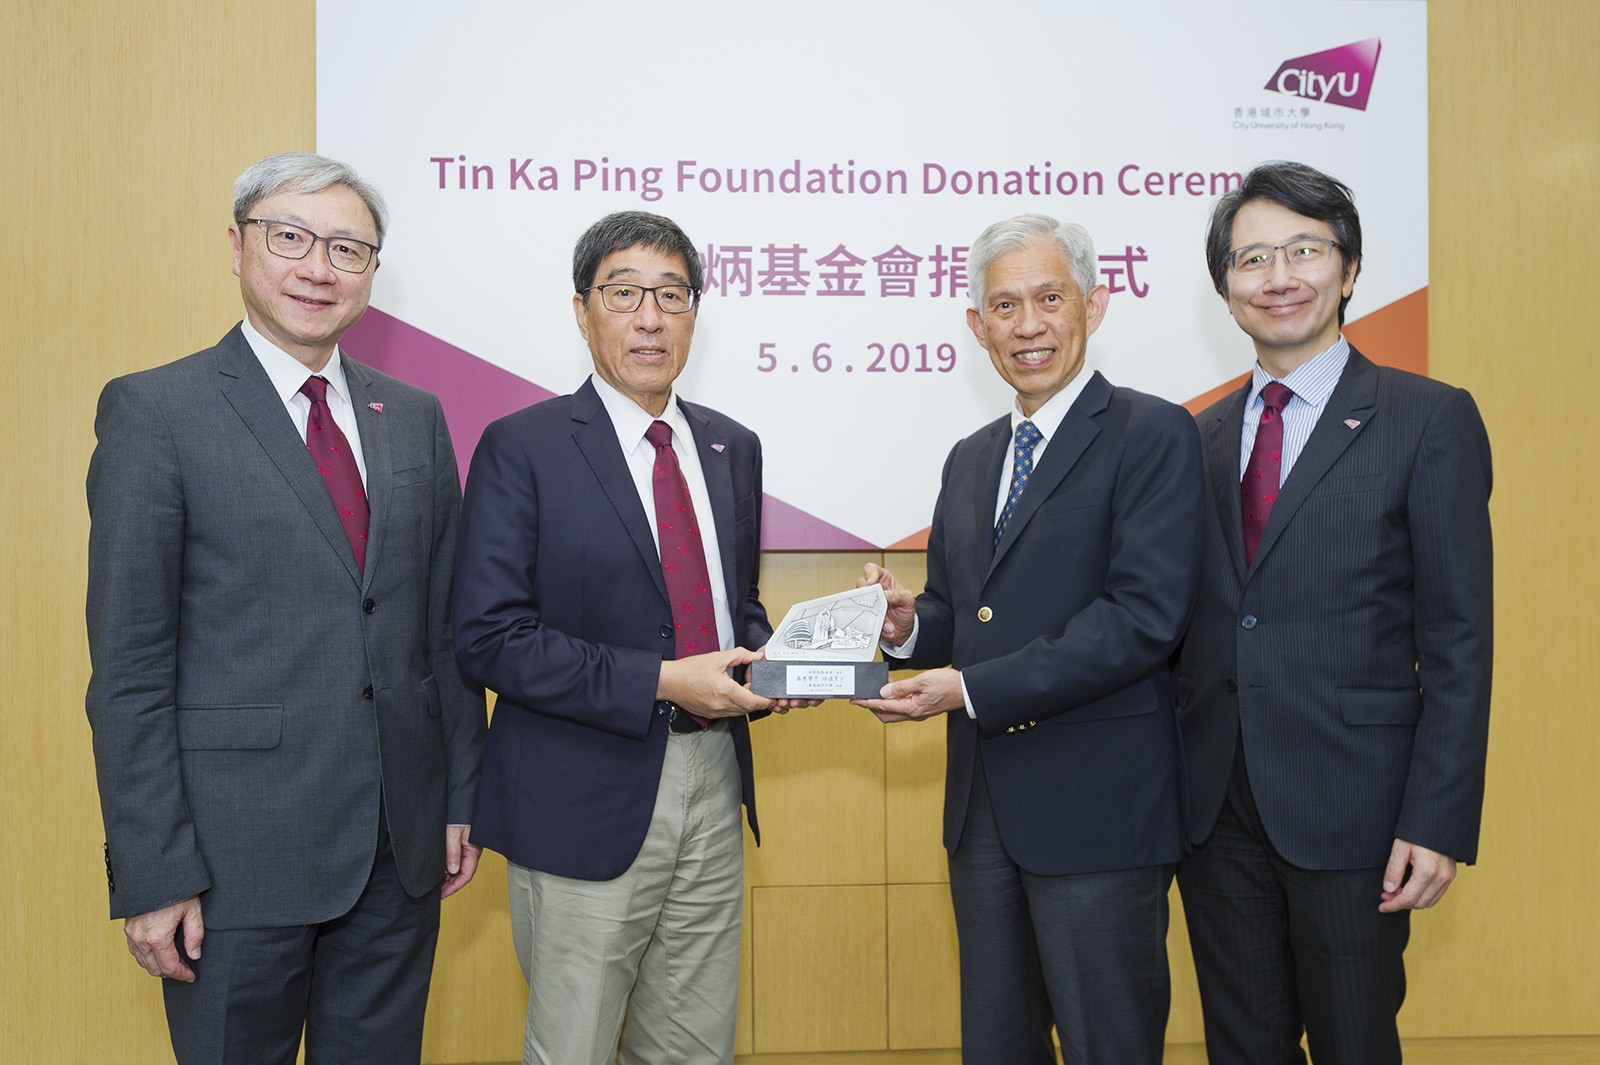 Professor Way Kuo (second from left), CityU President, Professor Matthew Lee Kwok-on (first from right), Vice-President (Development and External Relations), and Professor Horace Ip Ho-shing (first from left), Vice-President (Student Affairs), present a souvenir to Mr Sam Tin Hing-sin, Chairman of the Tin Ka Ping Foundation Board.